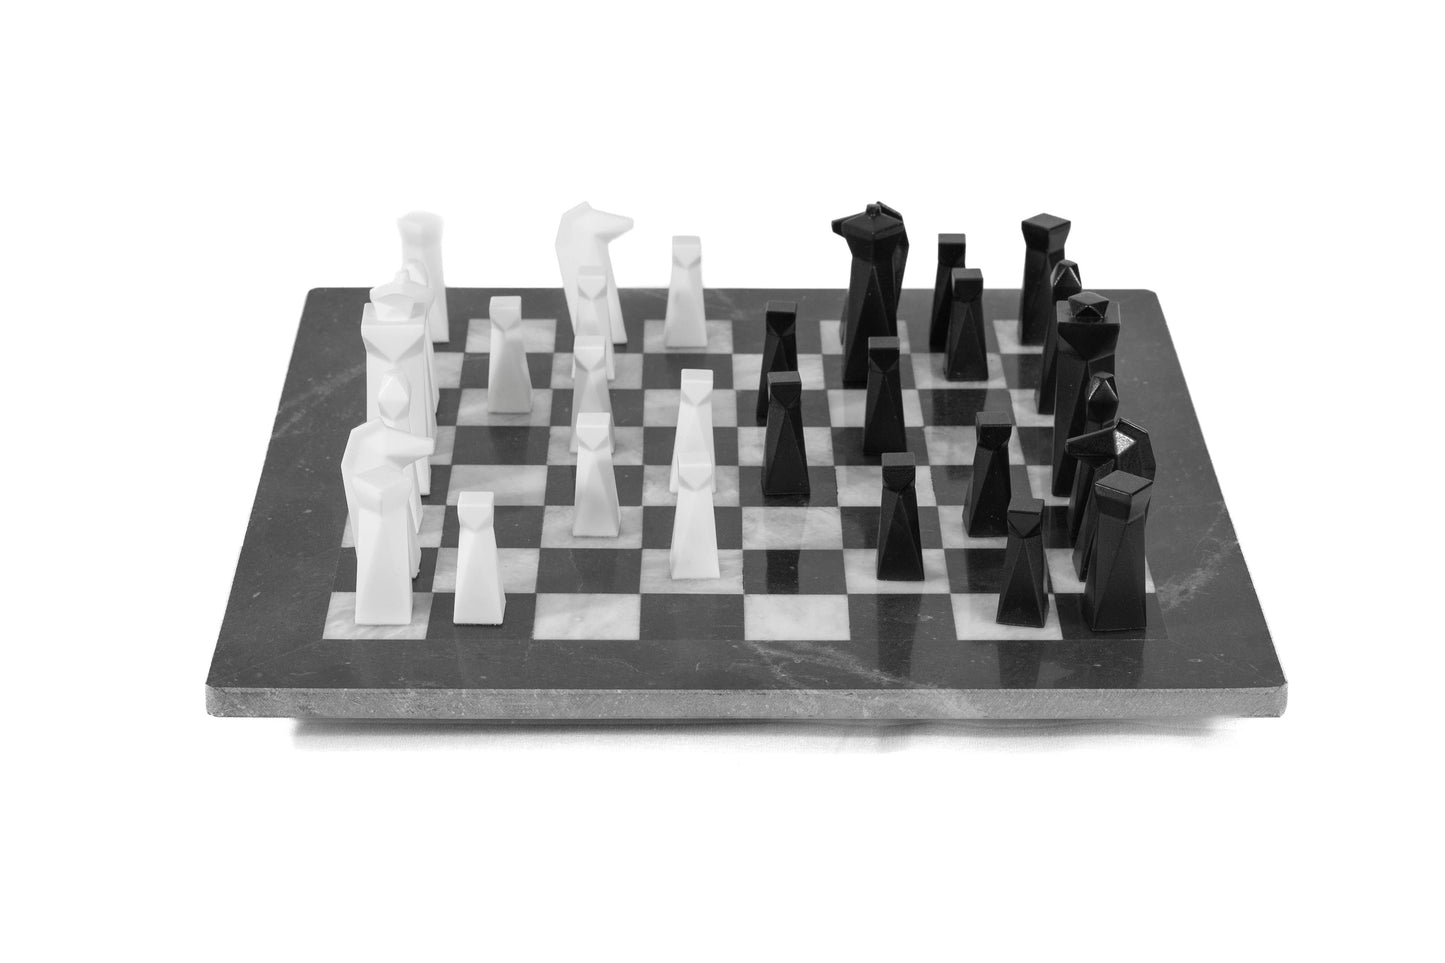 Modern Chess Set, Weighted Resin Chess Pieces and 15" Marble Board, Handmade Unique Chess Set, Luxury Personalized Gift, Custom Chess Pieces